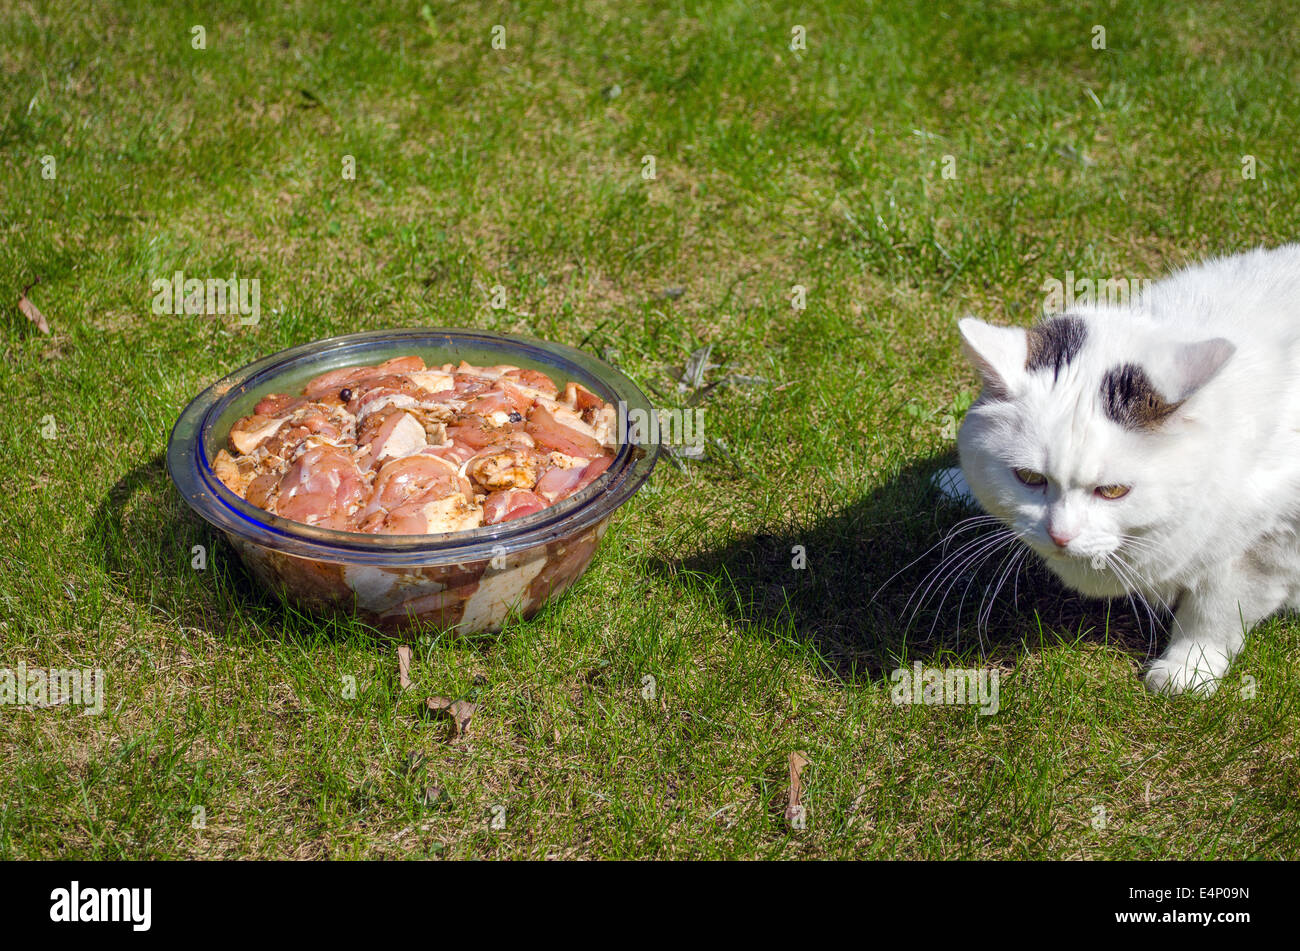 large glass bowl with the marinated pork pieces outside in the meadow next curious white cat Stock Photo